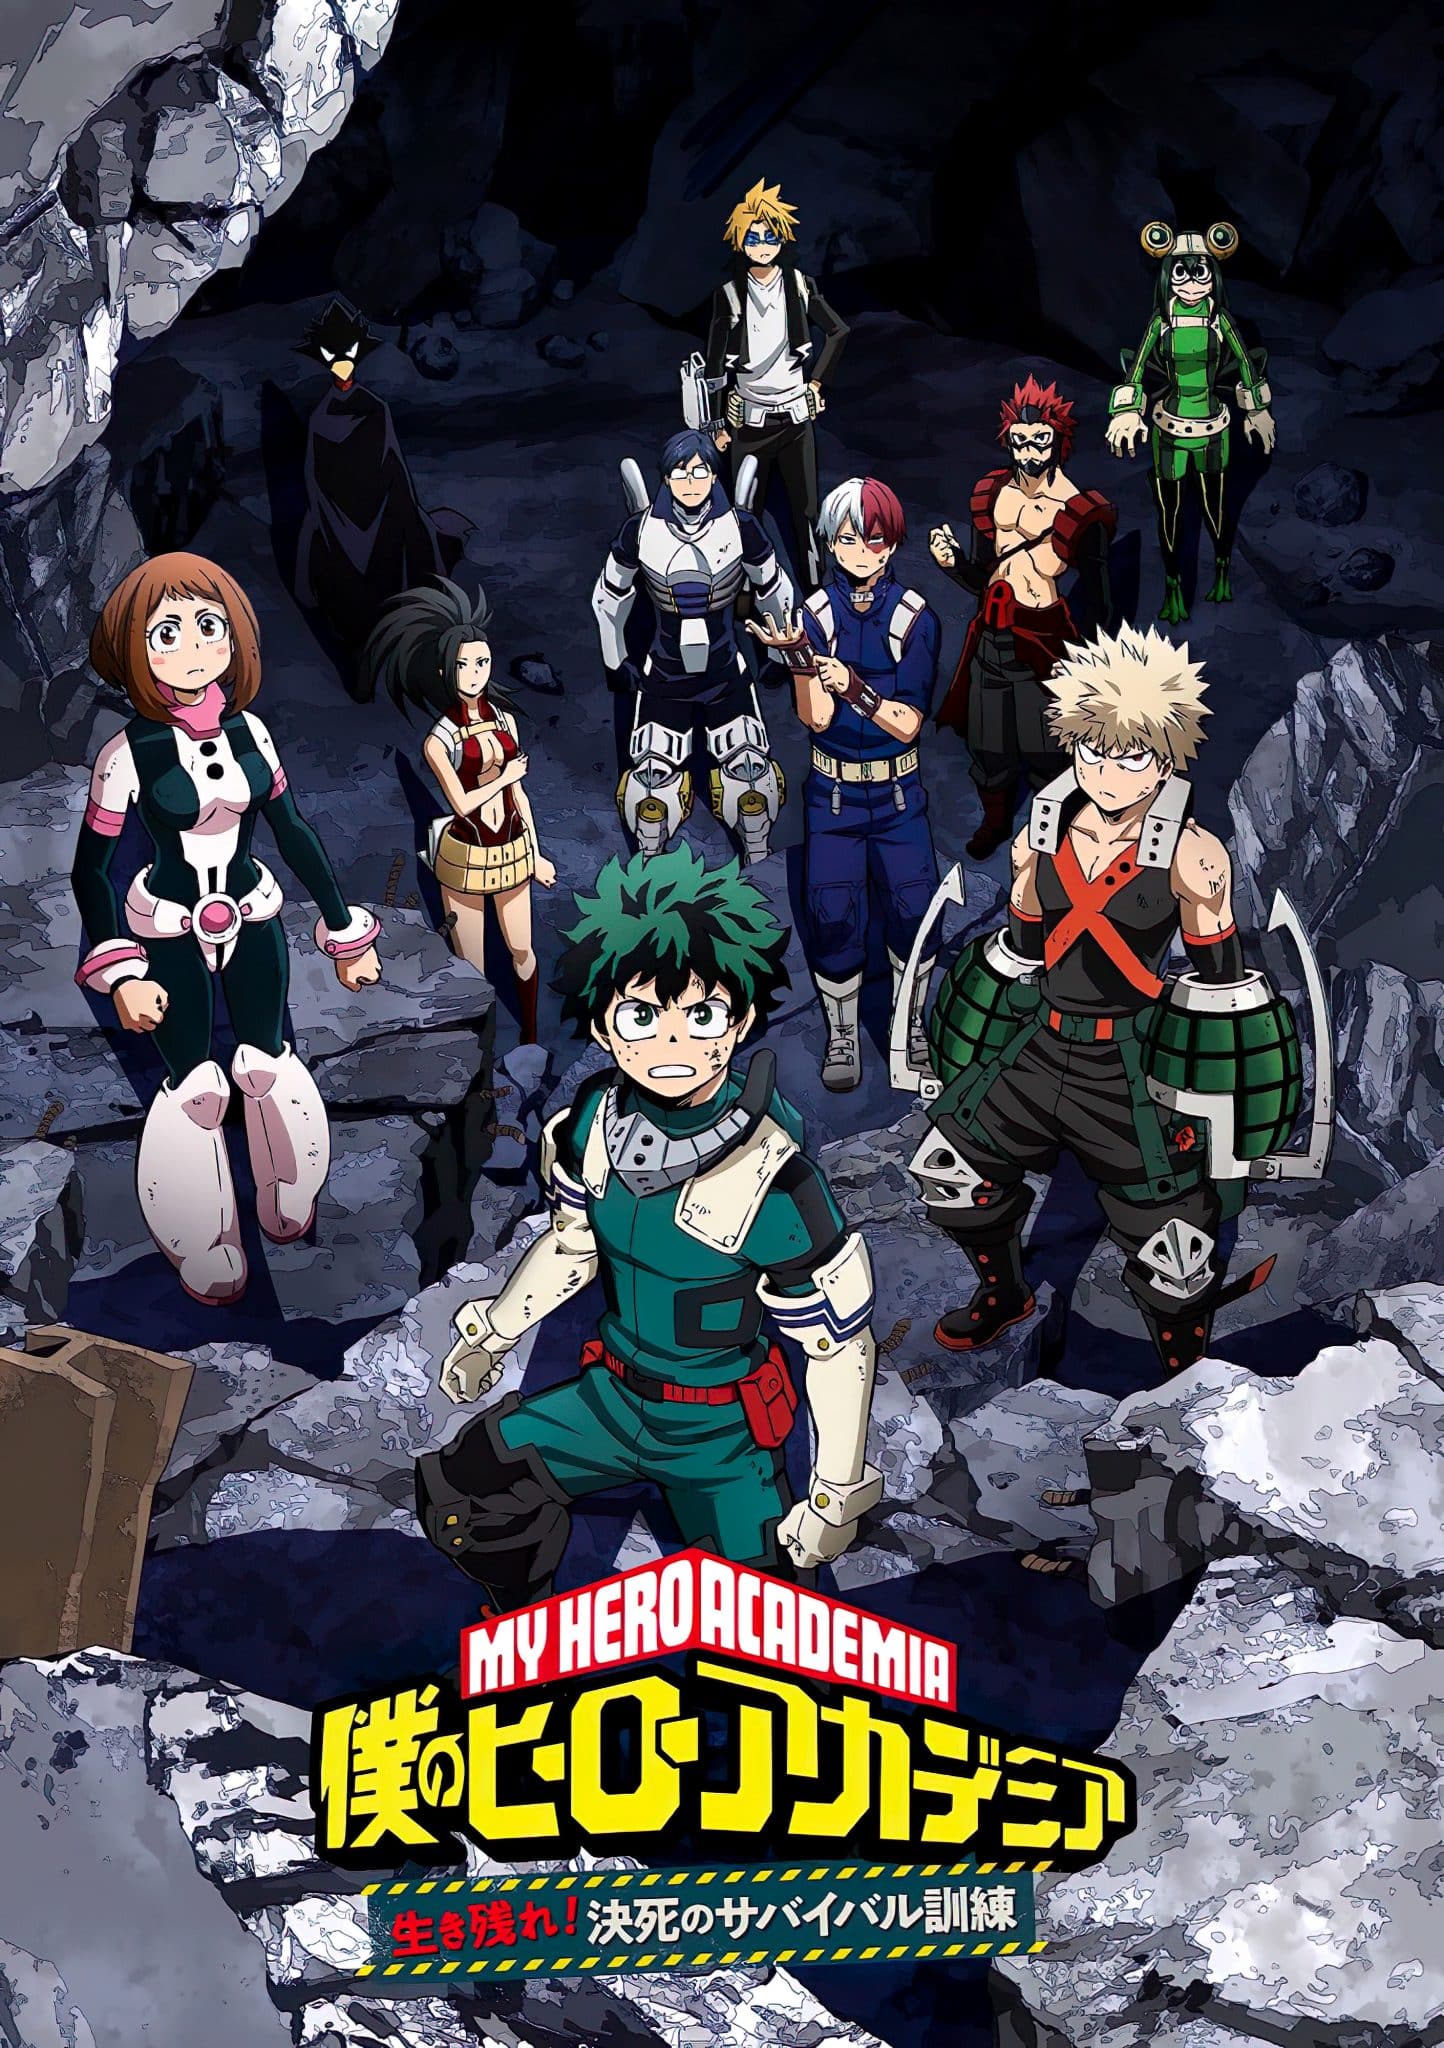 My Hero Academia will release a new OVA this month 〜 Anime ...